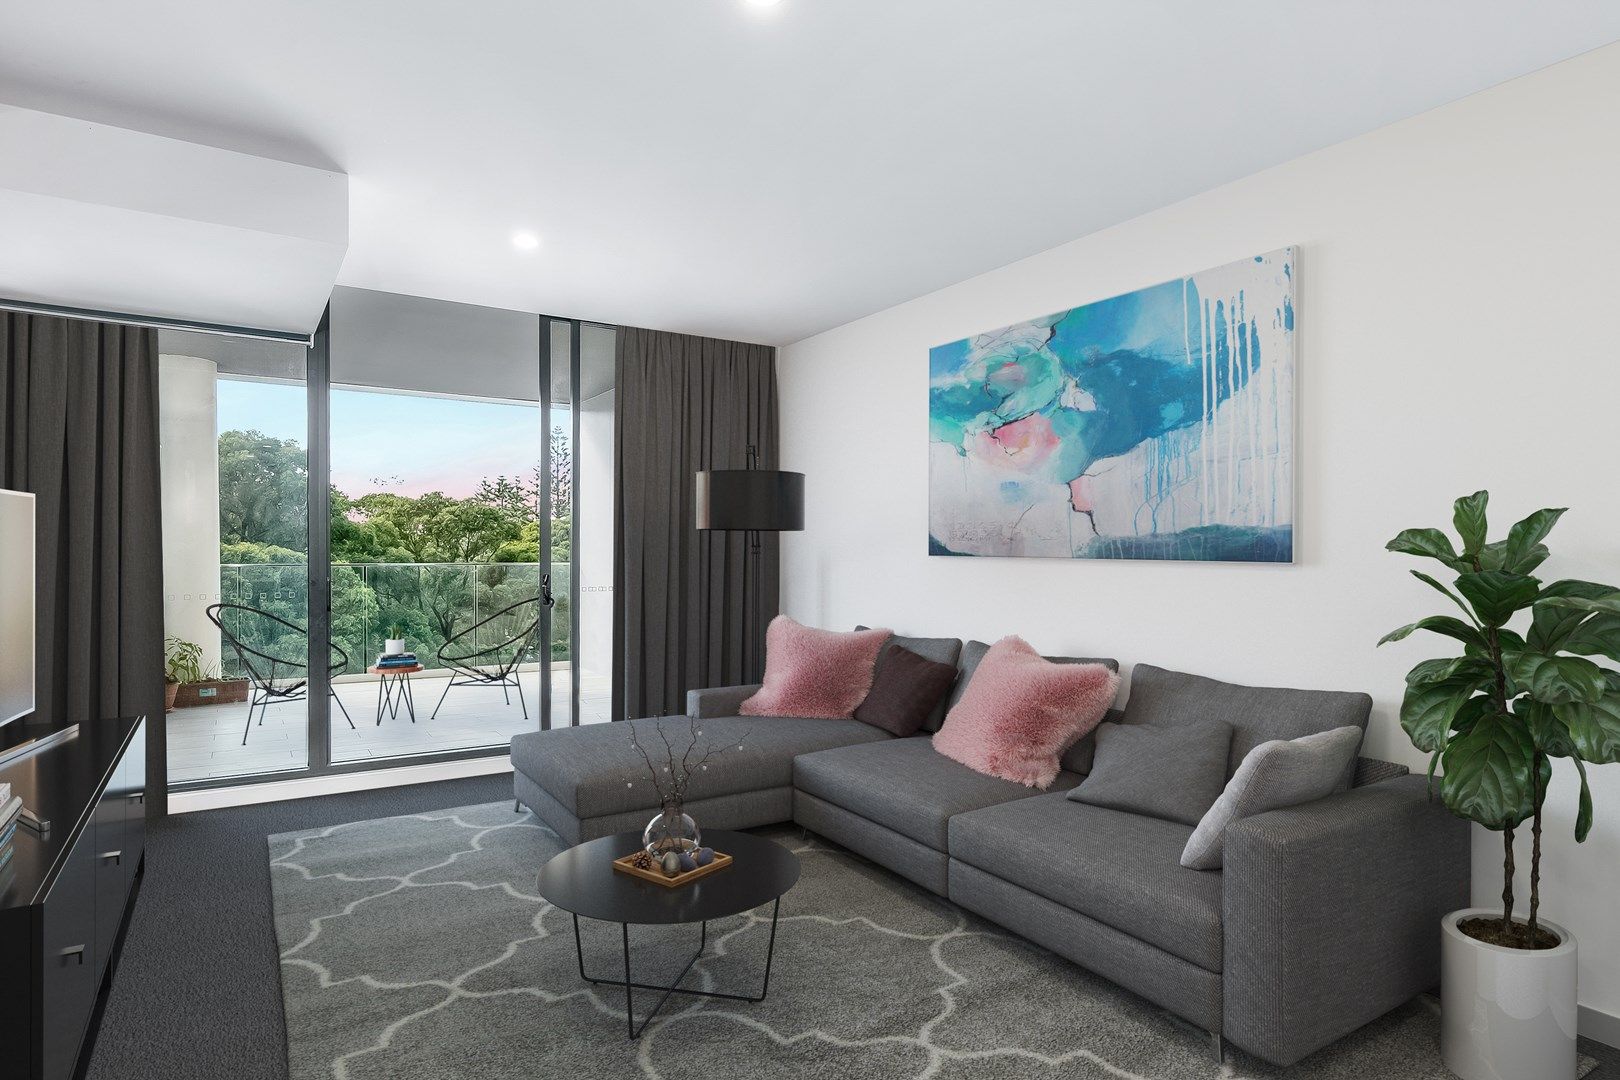 2 bedrooms Apartment / Unit / Flat in 513/1 Saint David DEE WHY NSW, 2099